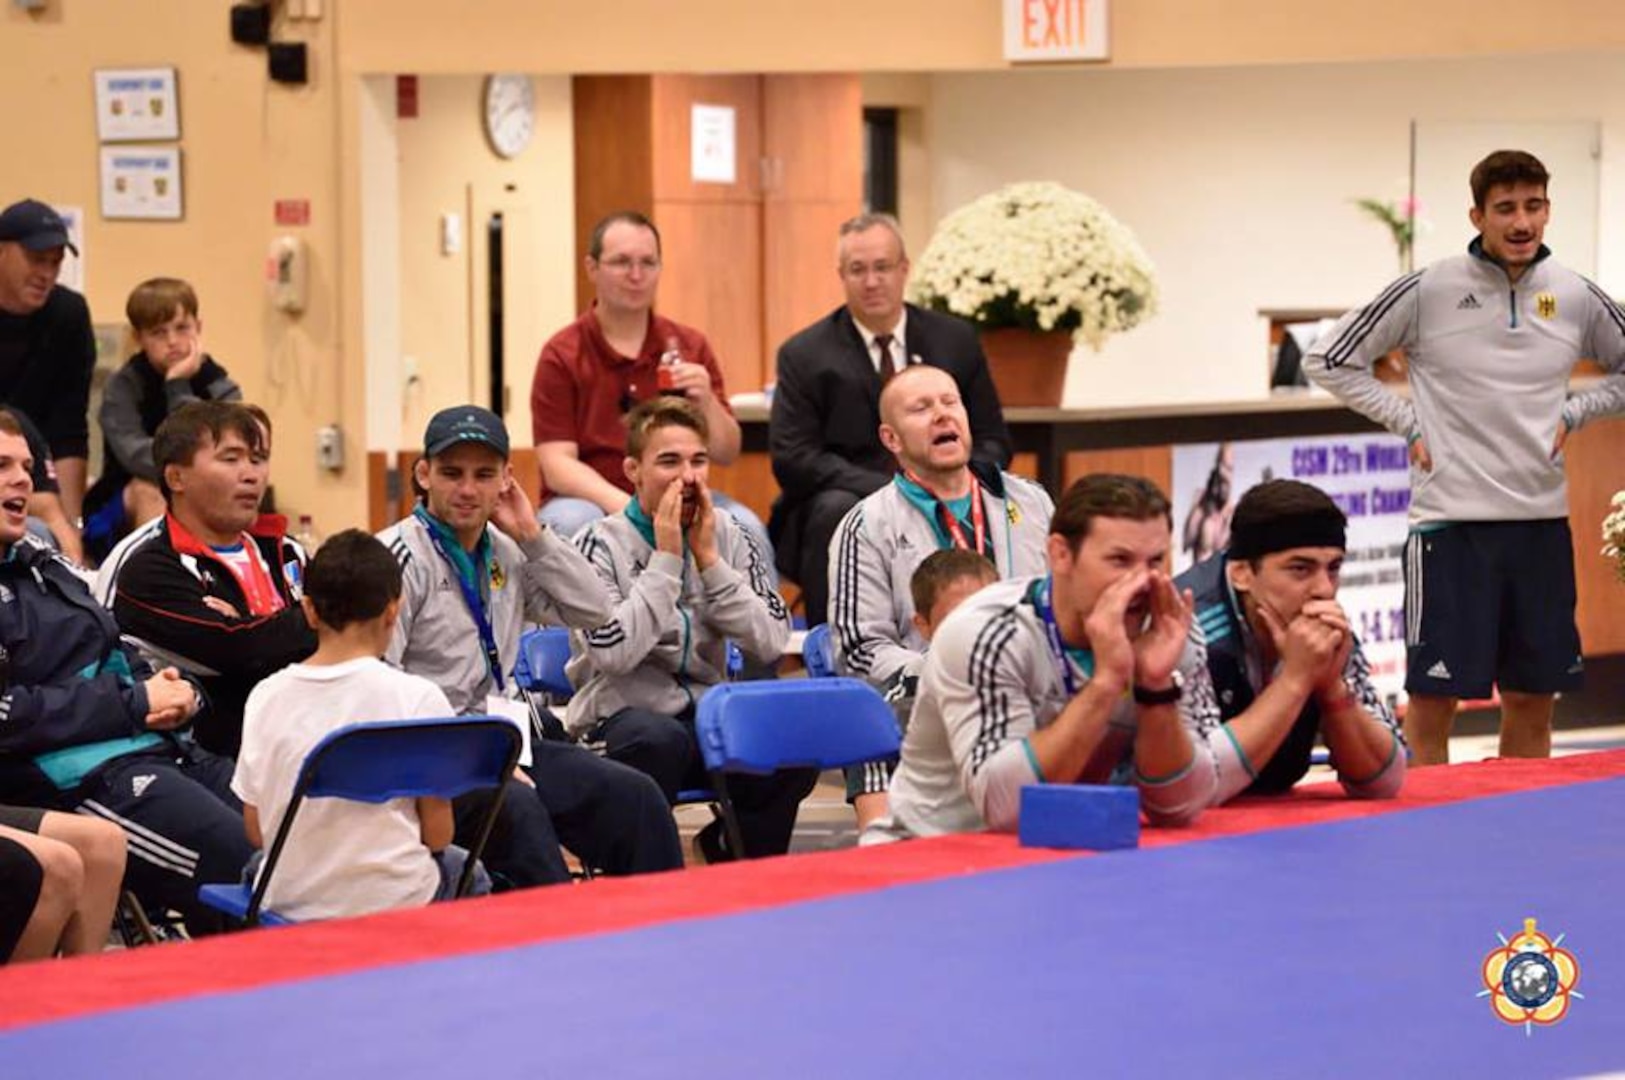 Team Germany cheers on at the 29th CISM World Military Wresting Championship at Joint Base McGuire-Dix-Lakehurst, New Jersey 1-8 October.